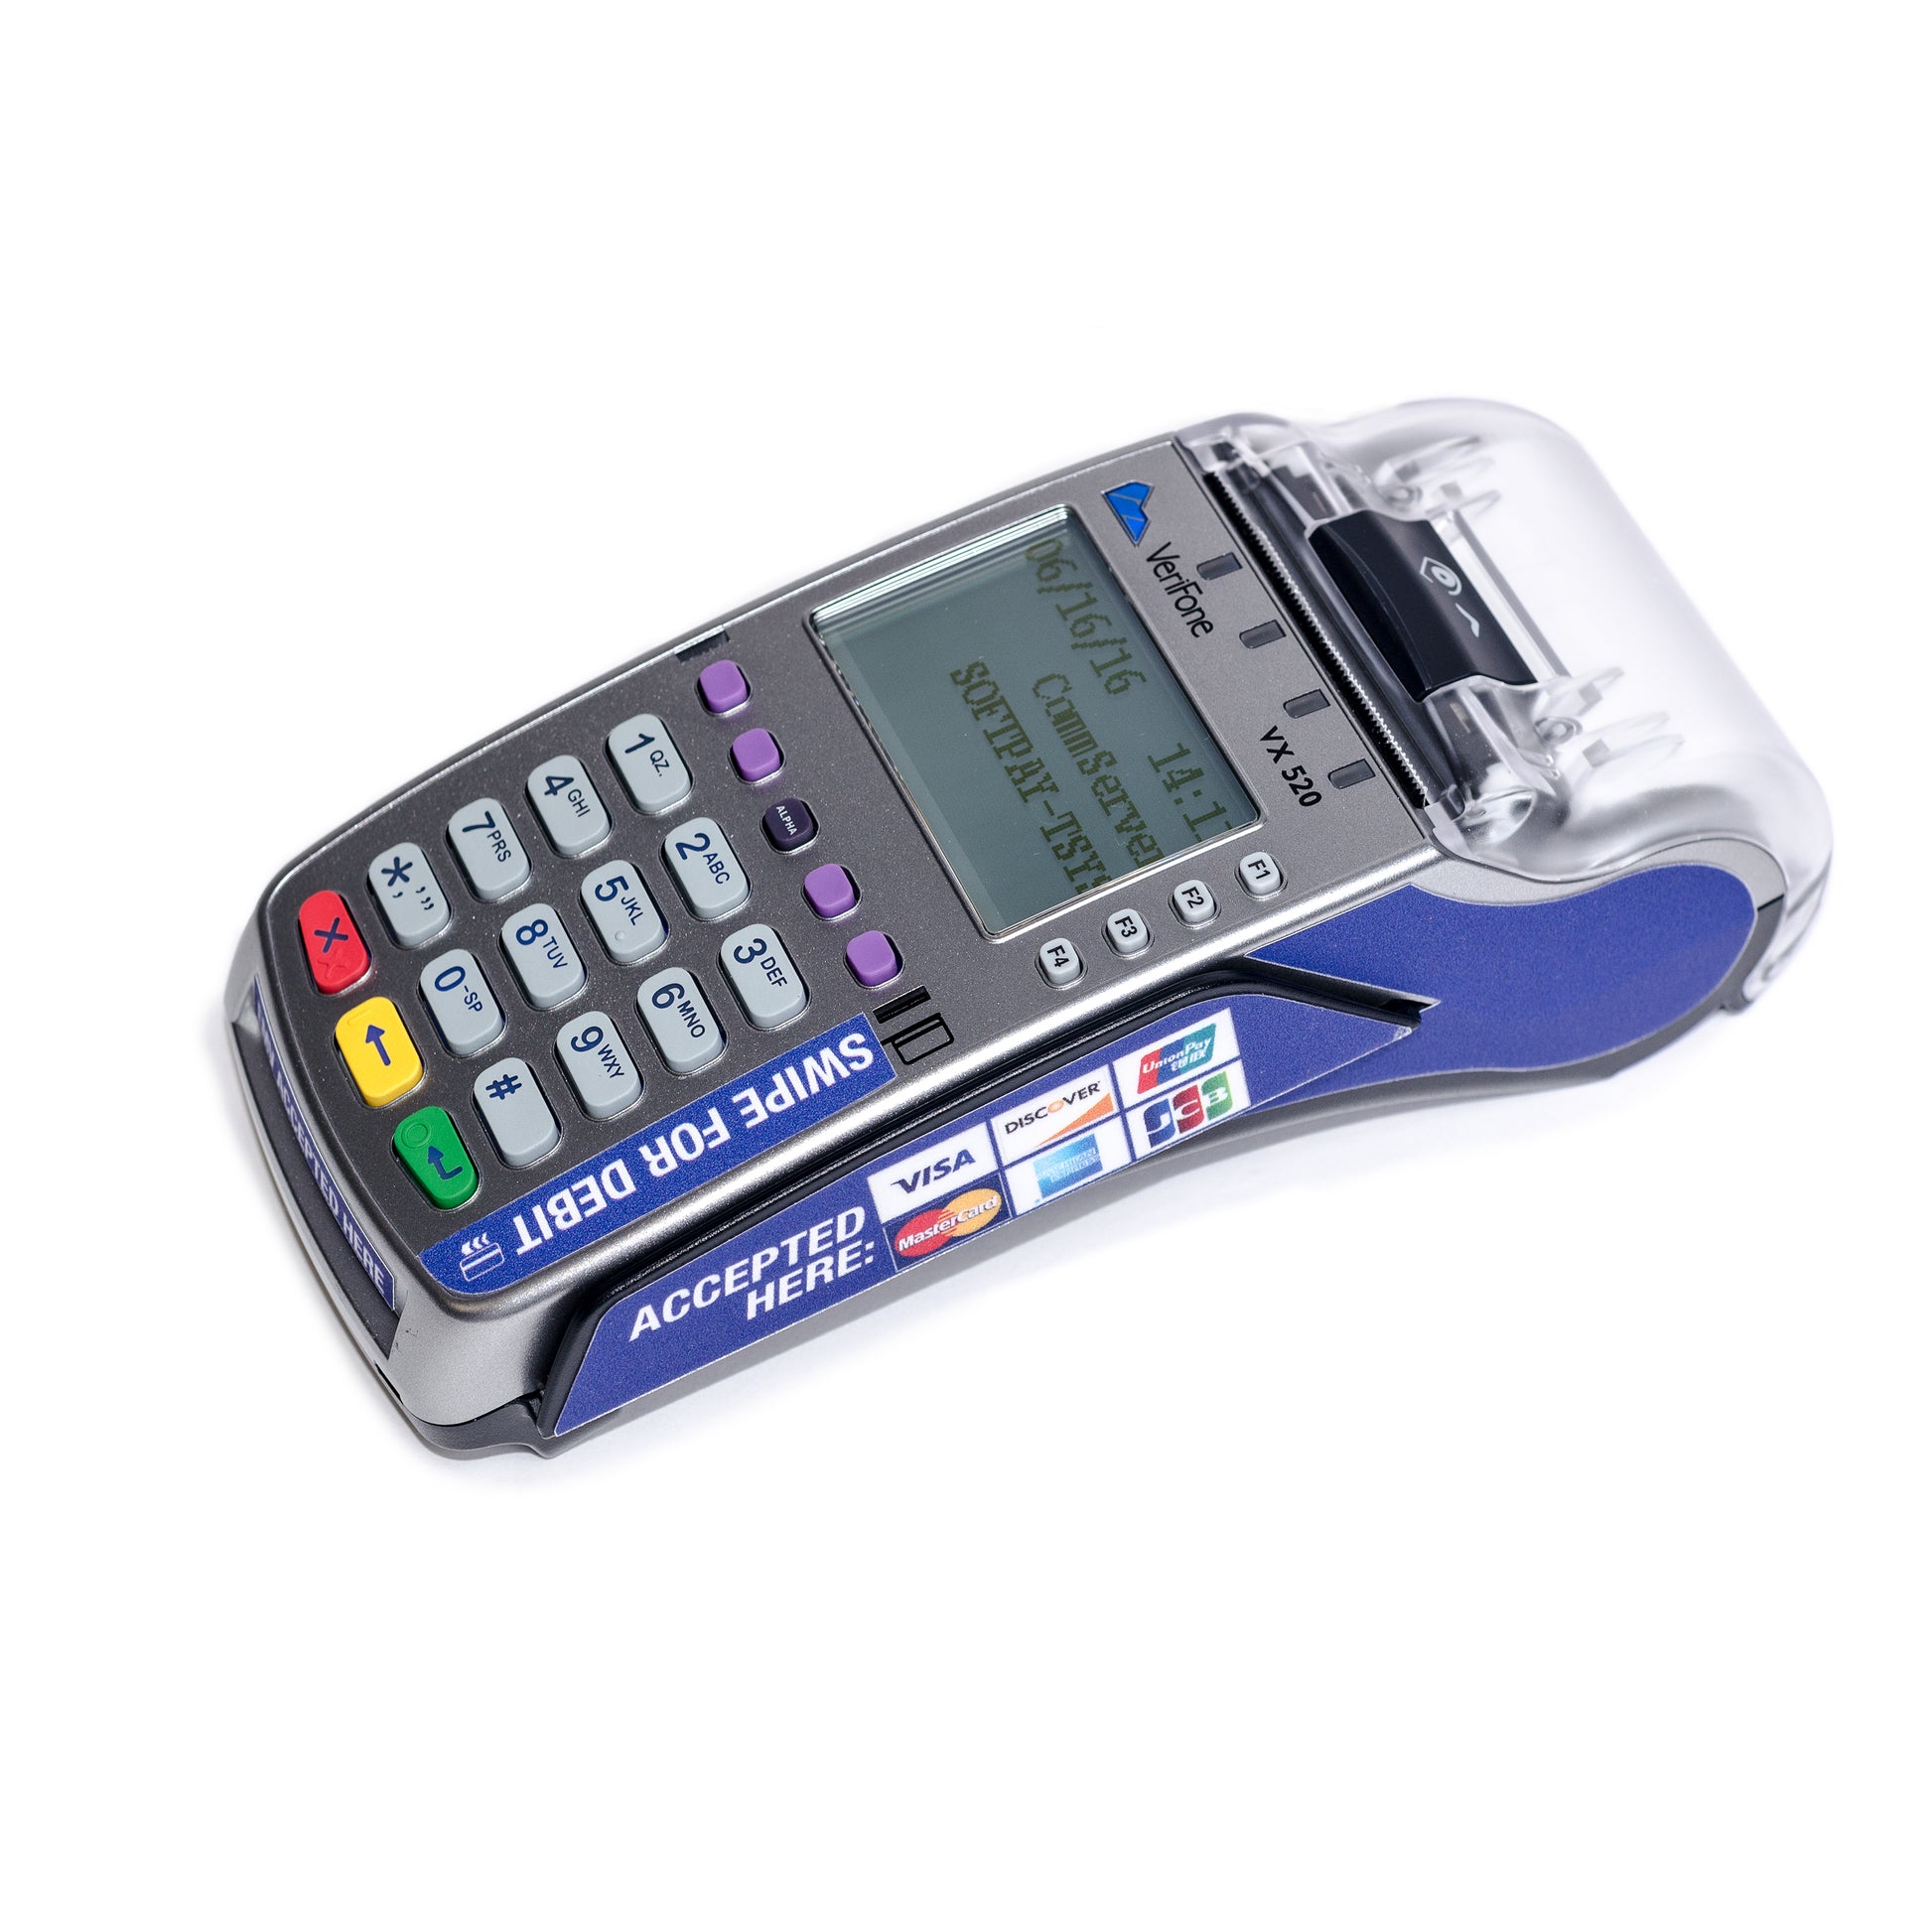 Verifone VX520 Point of Sale Terminal Wrap Rendering 4.